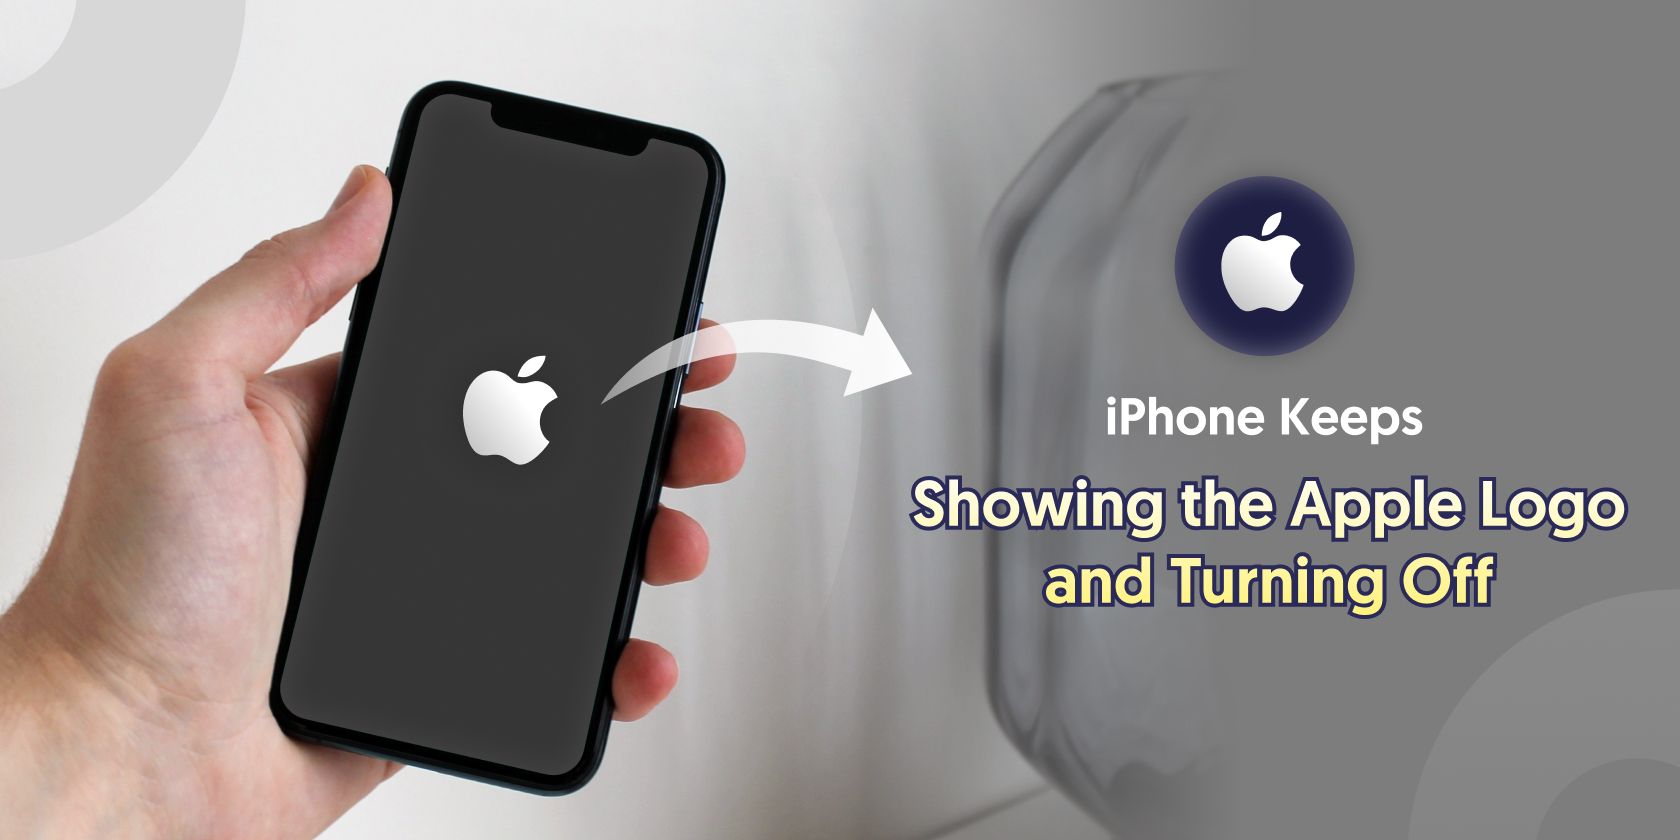 Turn on your iOS device by pressing and holding the power button until the Apple logo appears.
Connect your iOS device to your computer using a USB cable.